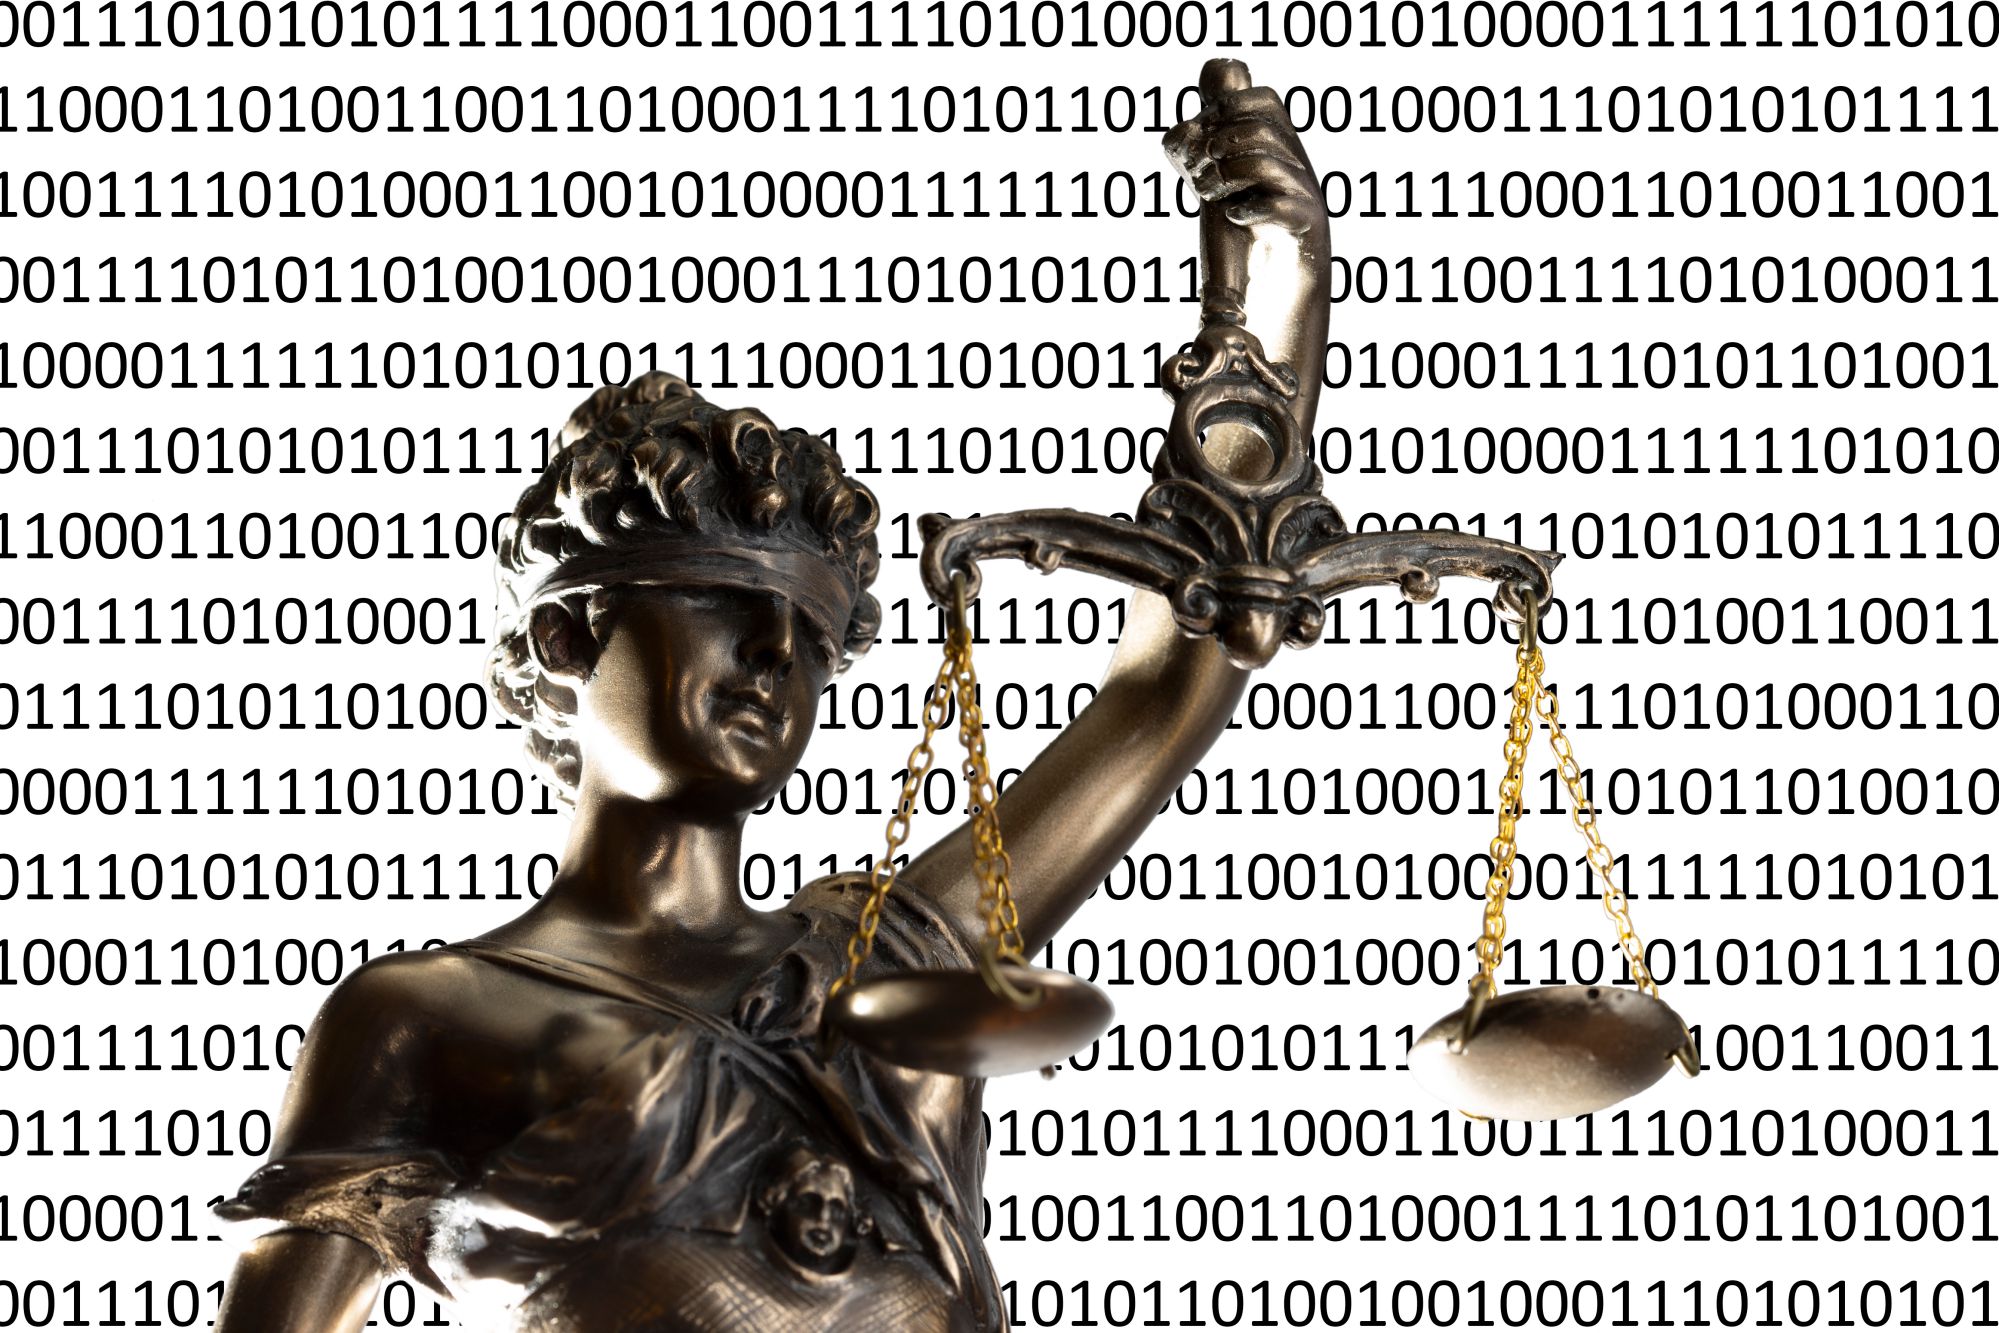 Legal-data-protection-courses.jpg